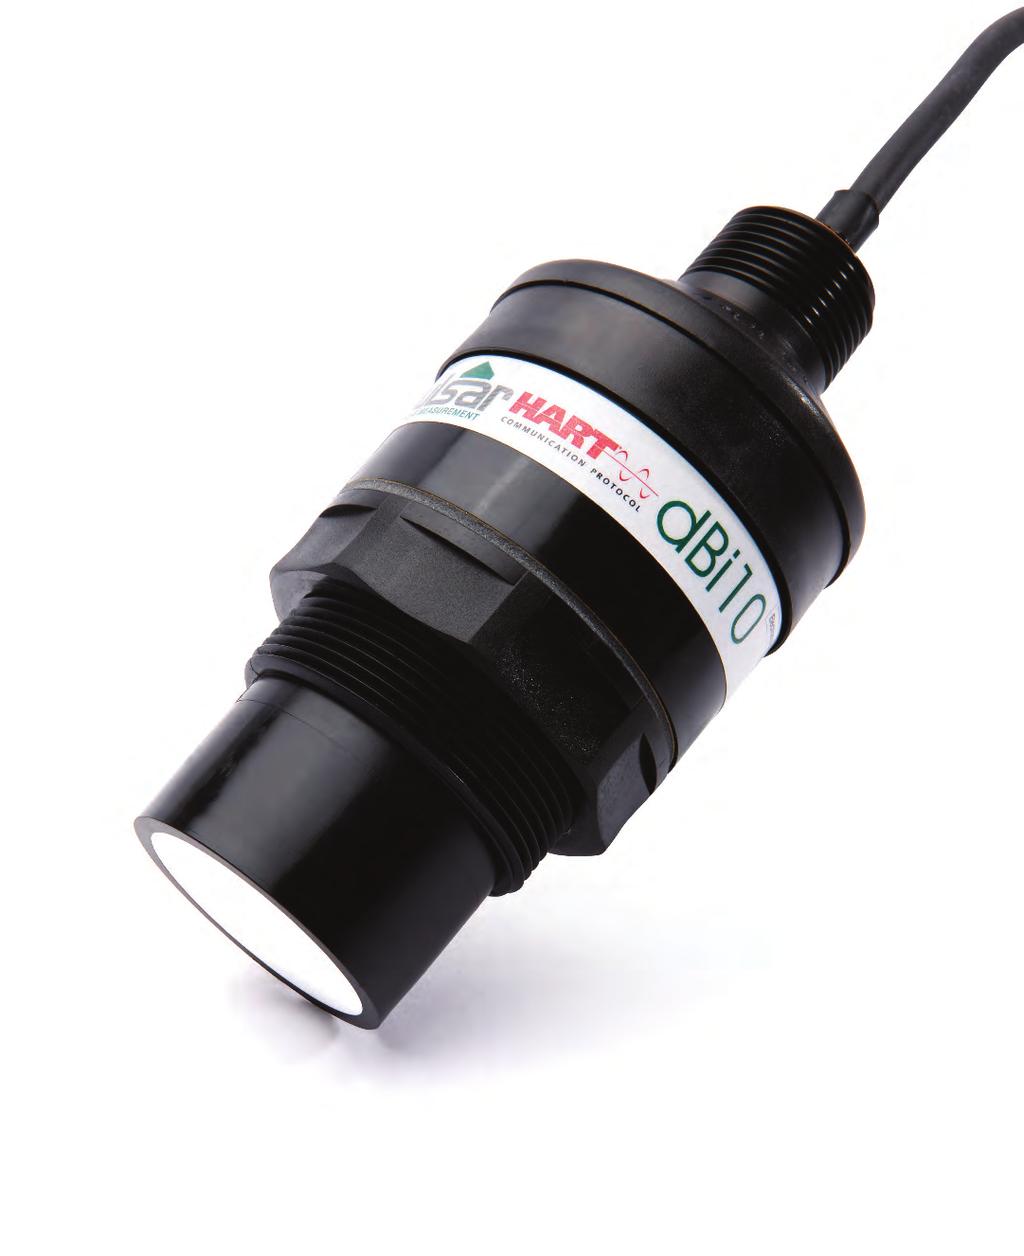 dbi Transducers with HART protocol Pulsar s dbi Series Intelligent Transducers featuring HART are typically programmed either via one of the several hand-held calibrators available, or via PC